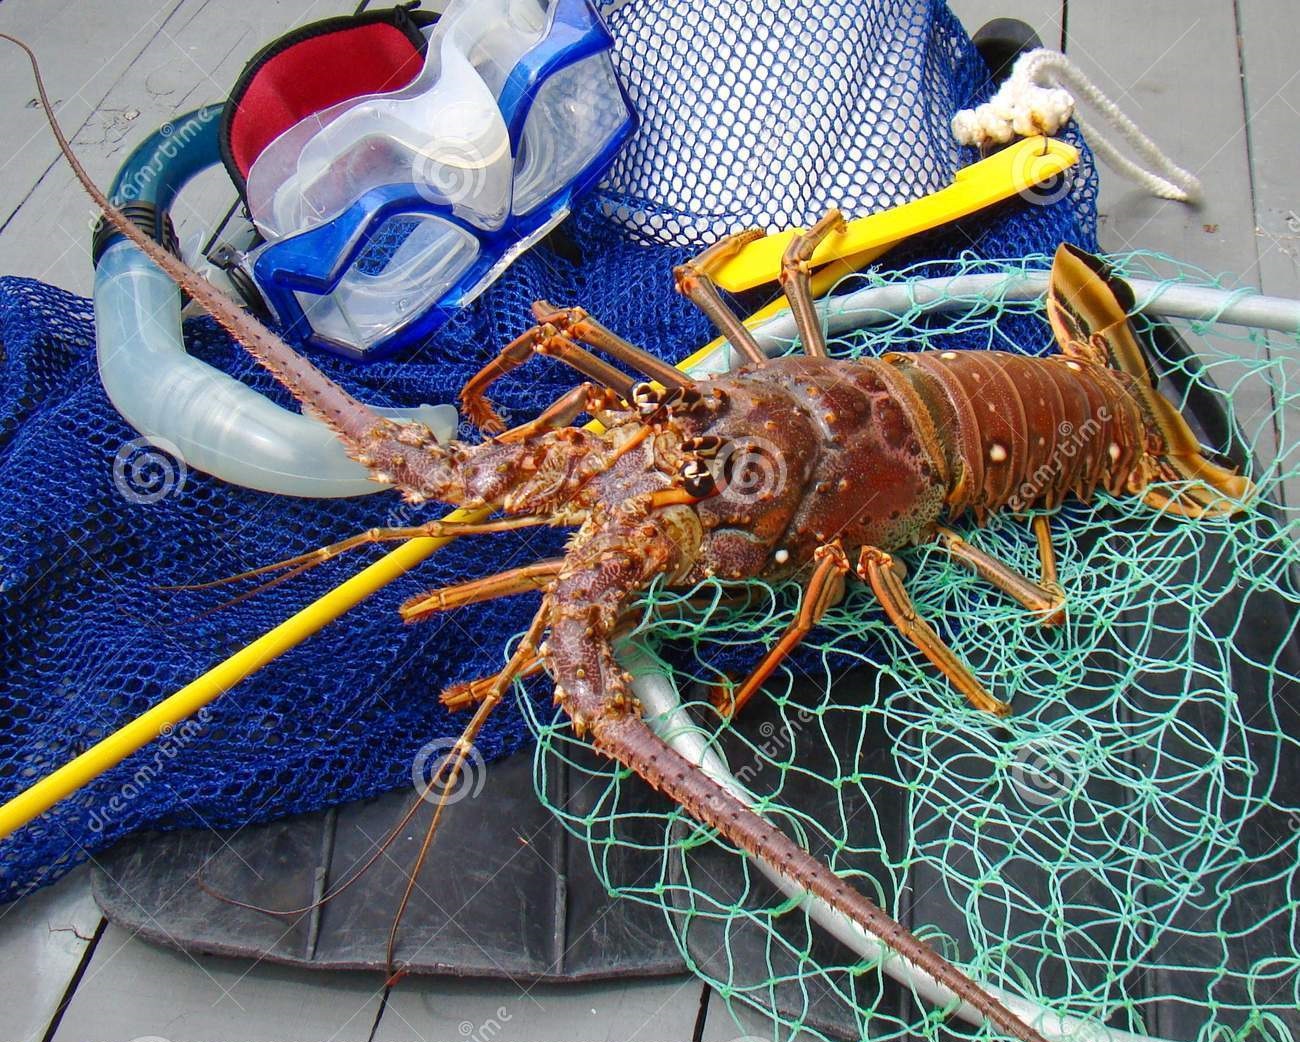 Florida Spiny Lobster Season and Dive Gear